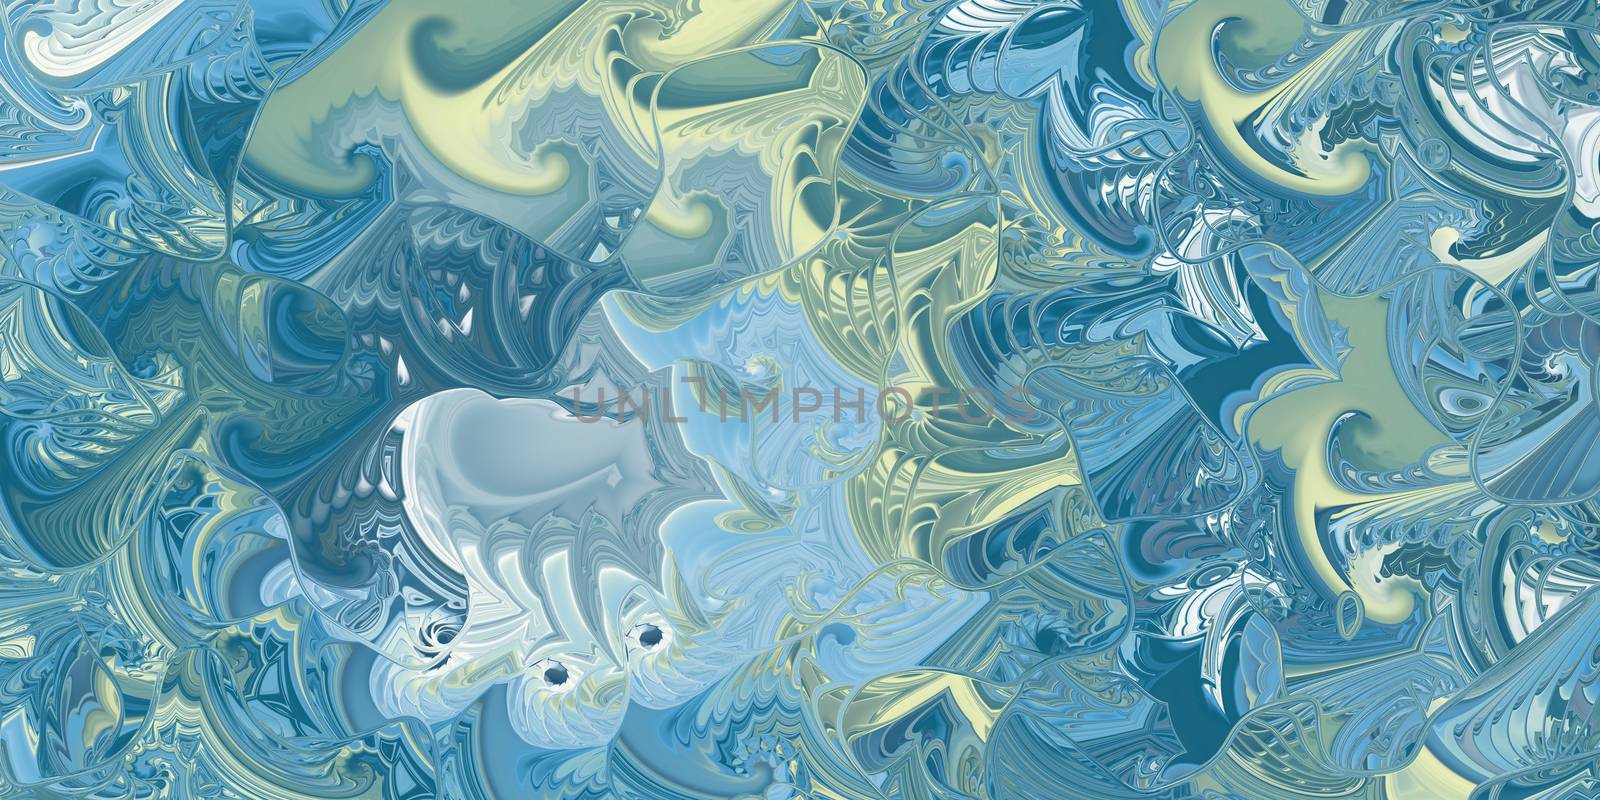 Deep Green Blue Sea Swirls Background. Abstract Ocean Marbling Curves Texture. Nautical Spiral Shell Infinity Backdrop.